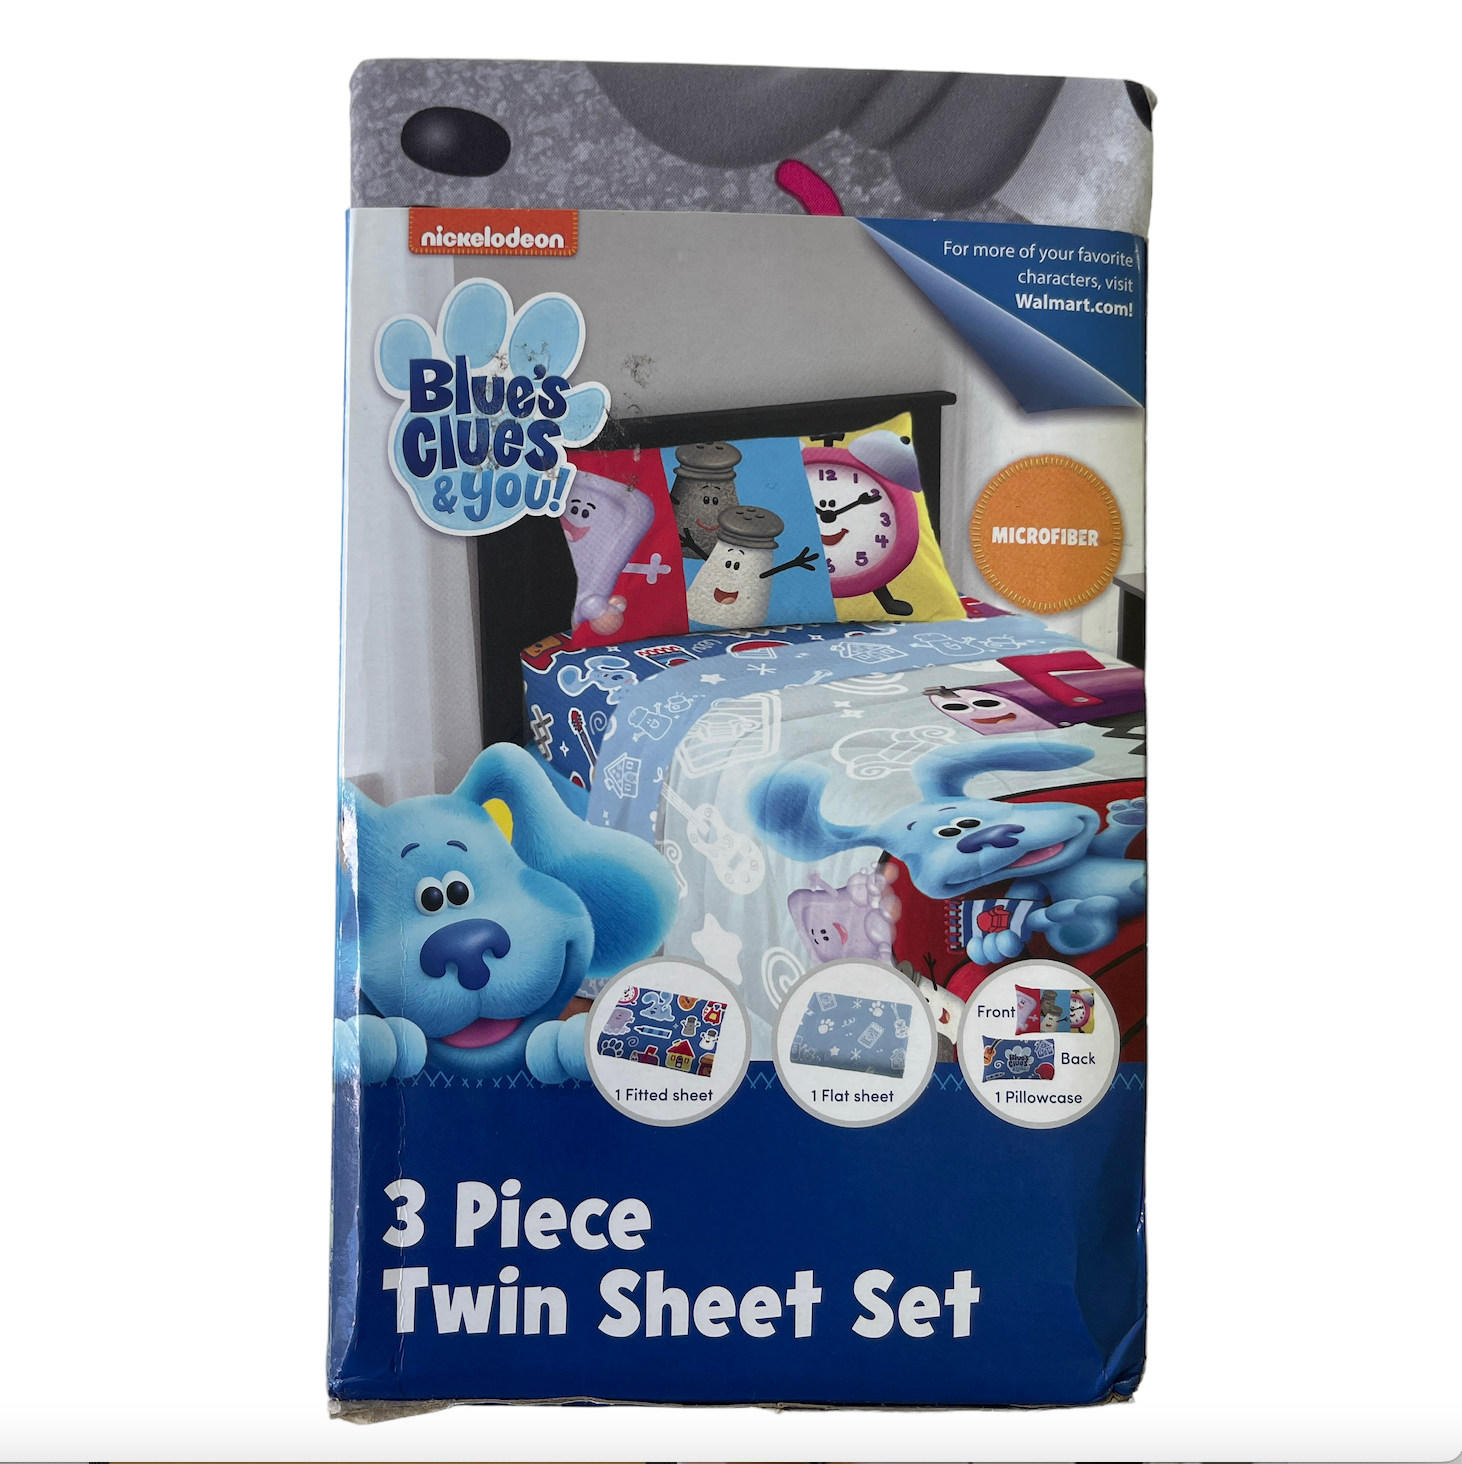 NEW Blue's Clues & You 3 Piece Twin Sheet Set Nickelodeon Microfiber New - $24.99